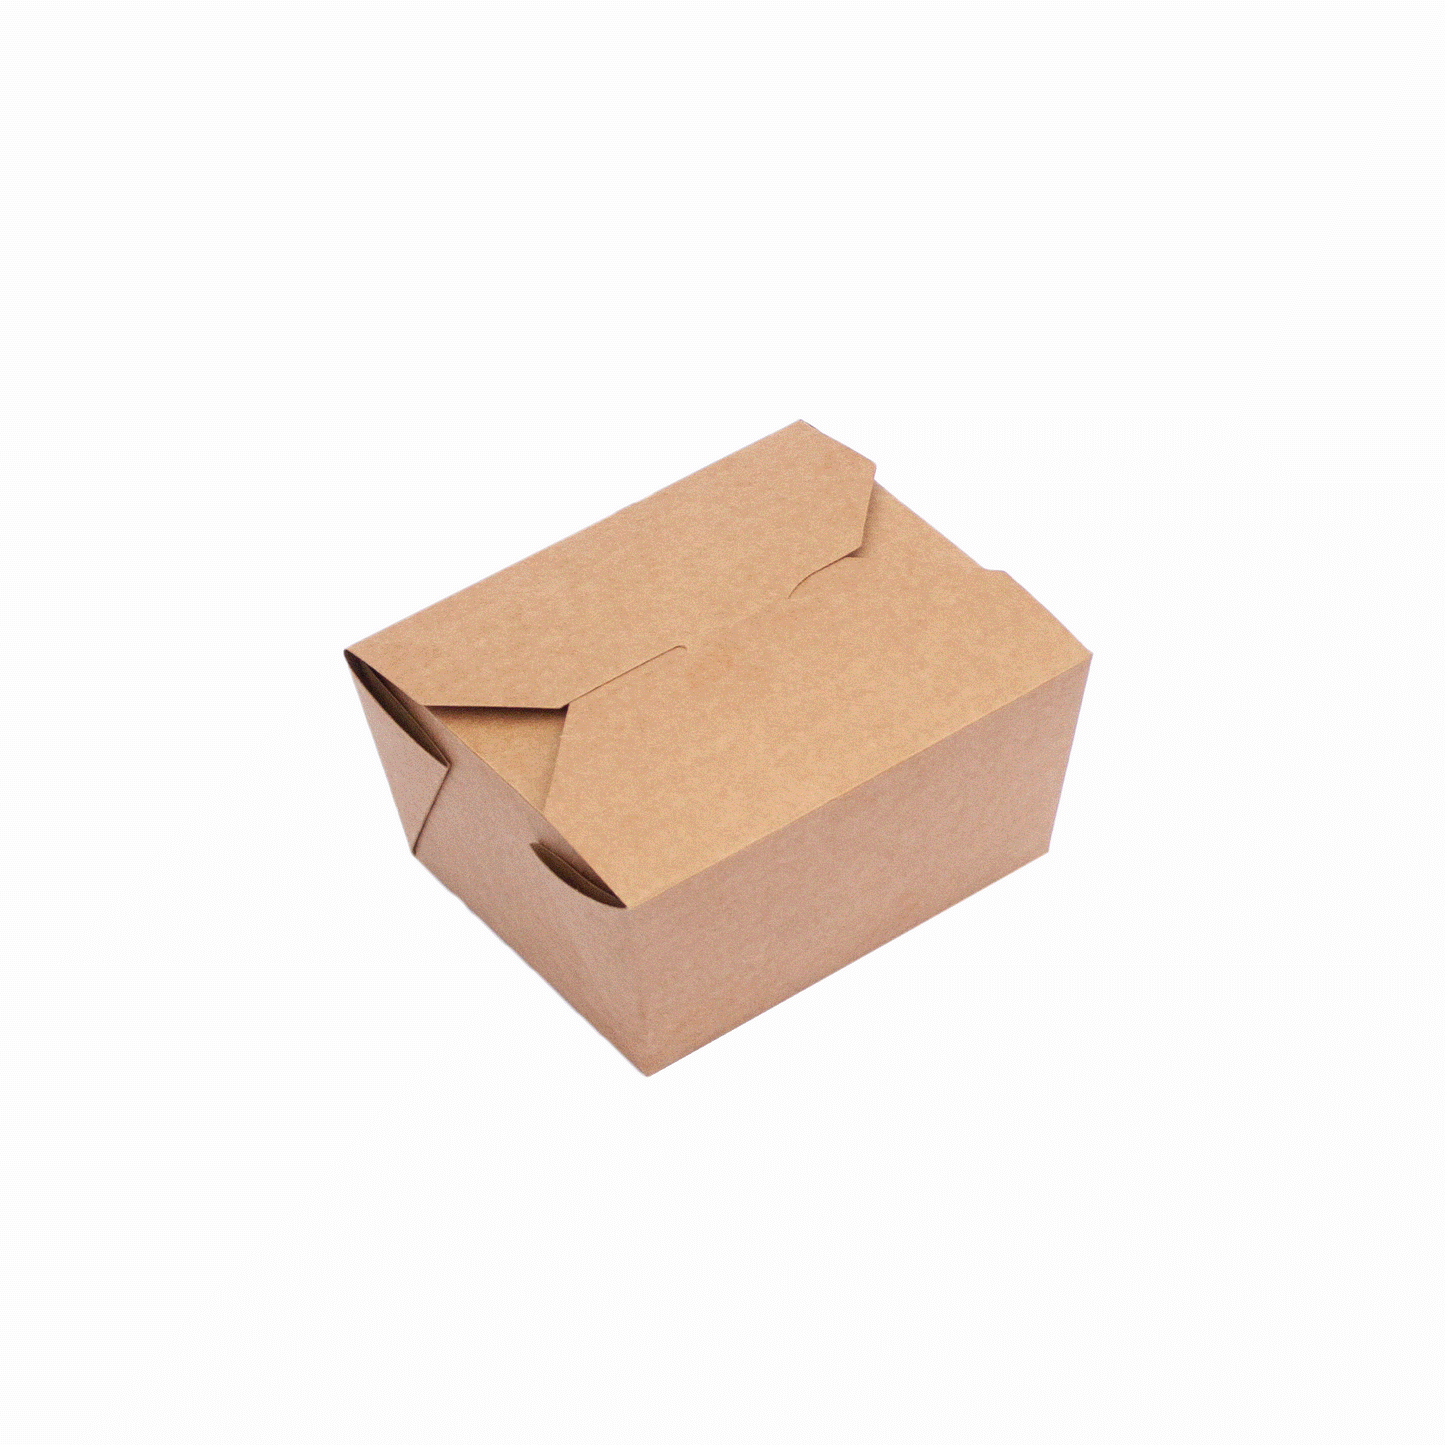 Food Container No.1 Take-away food-to-go carton 450 units, 800ml (11 x 9 x 6.5cm)